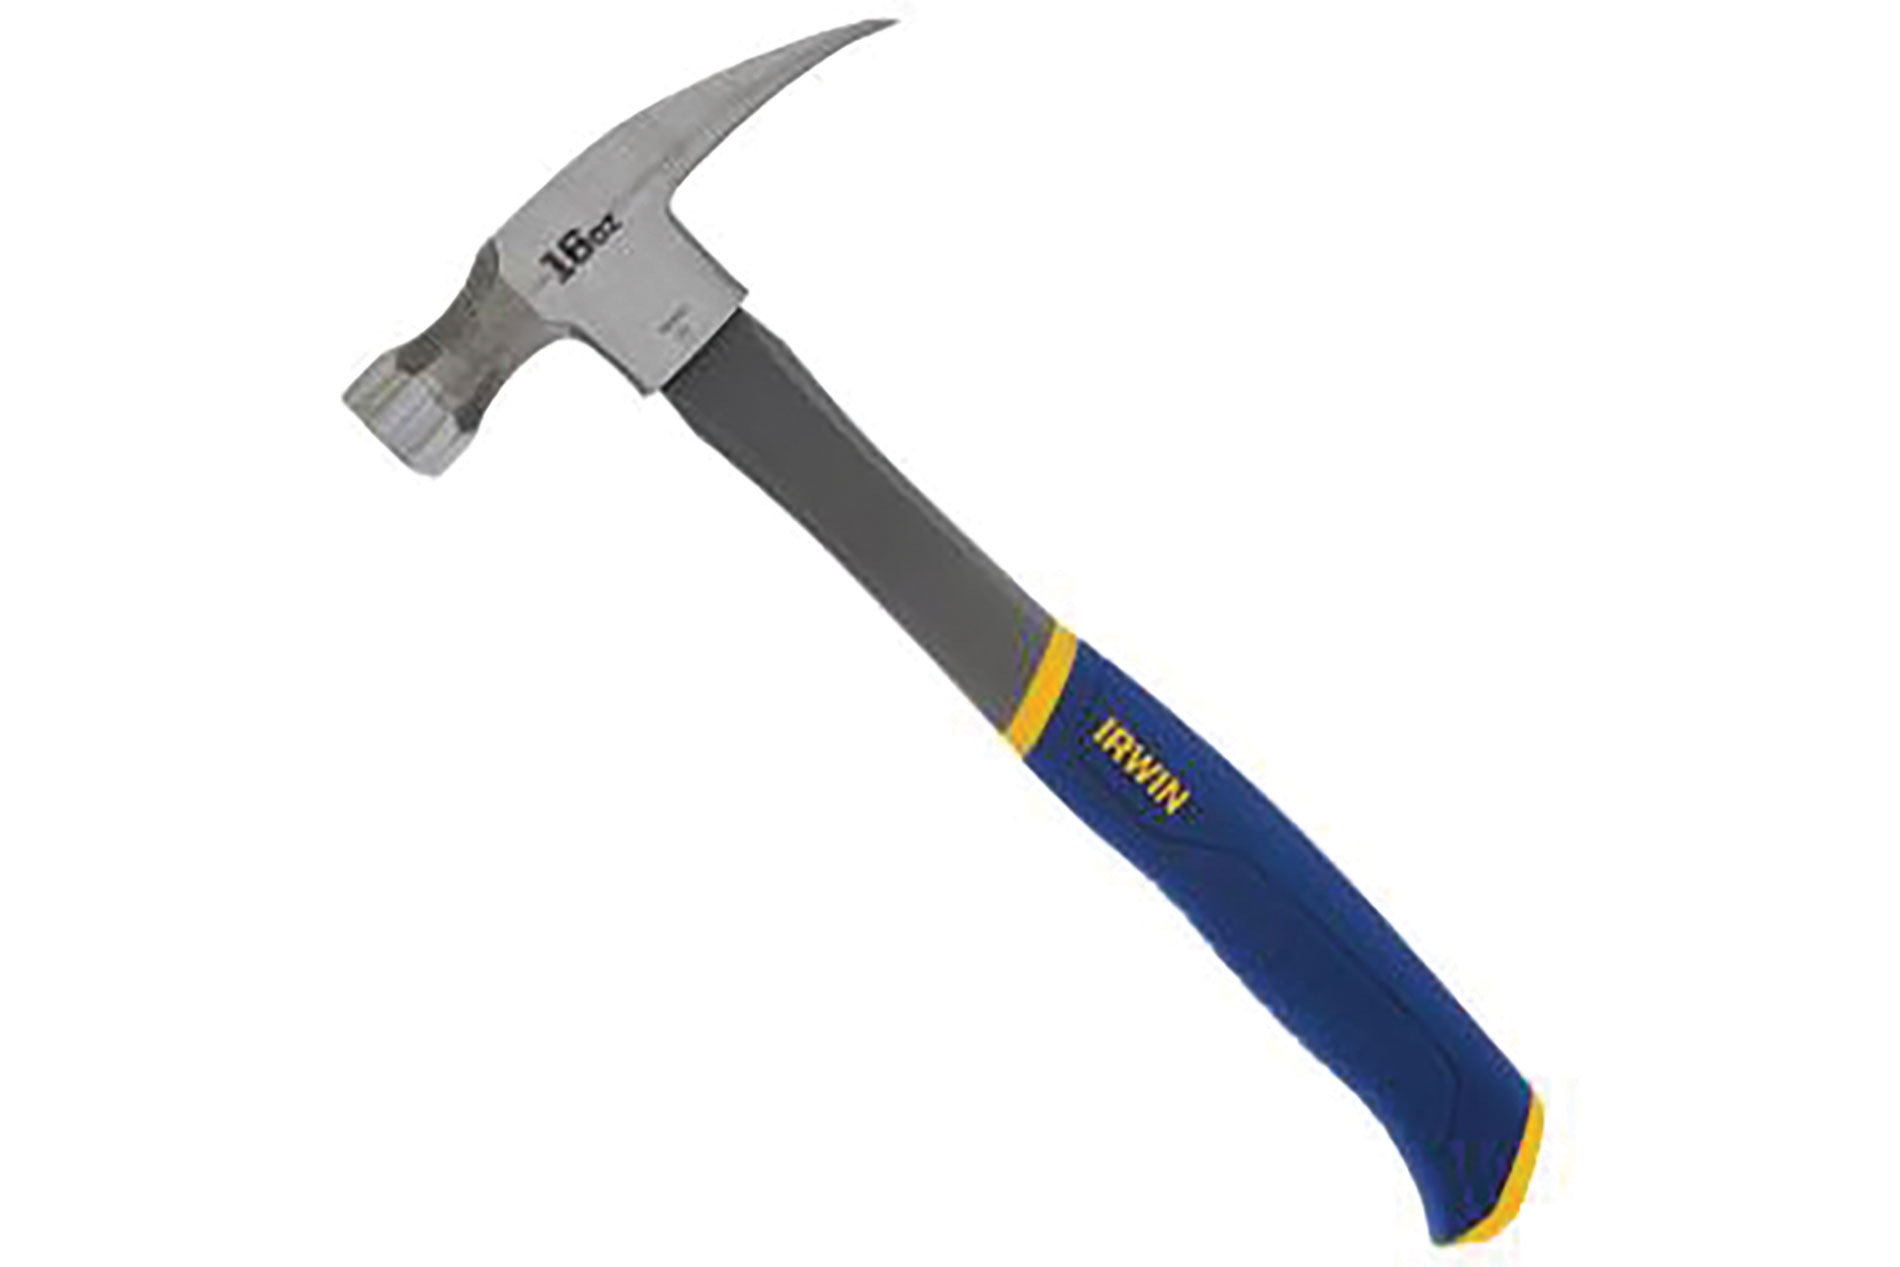 Hammer with a blue and yellow handle with a curved bottom and the Irwin logo. Image by Irwin Tools.